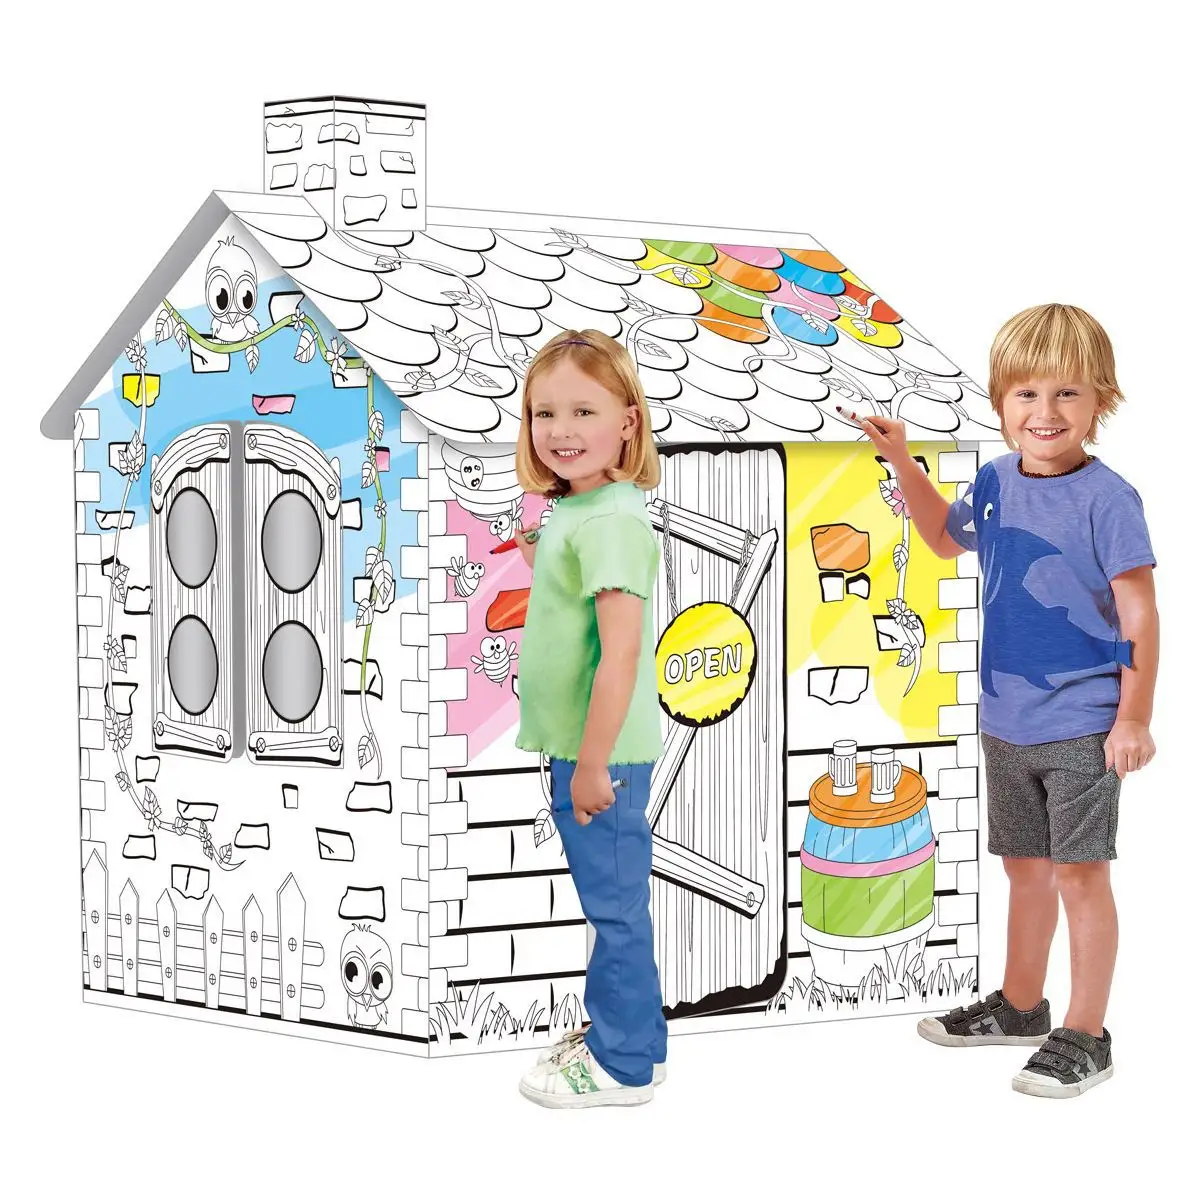 educational toy Creative Paper Art and Craft DIY Cardboard Playhouse Cartoon Pattern Drawing Painting toy